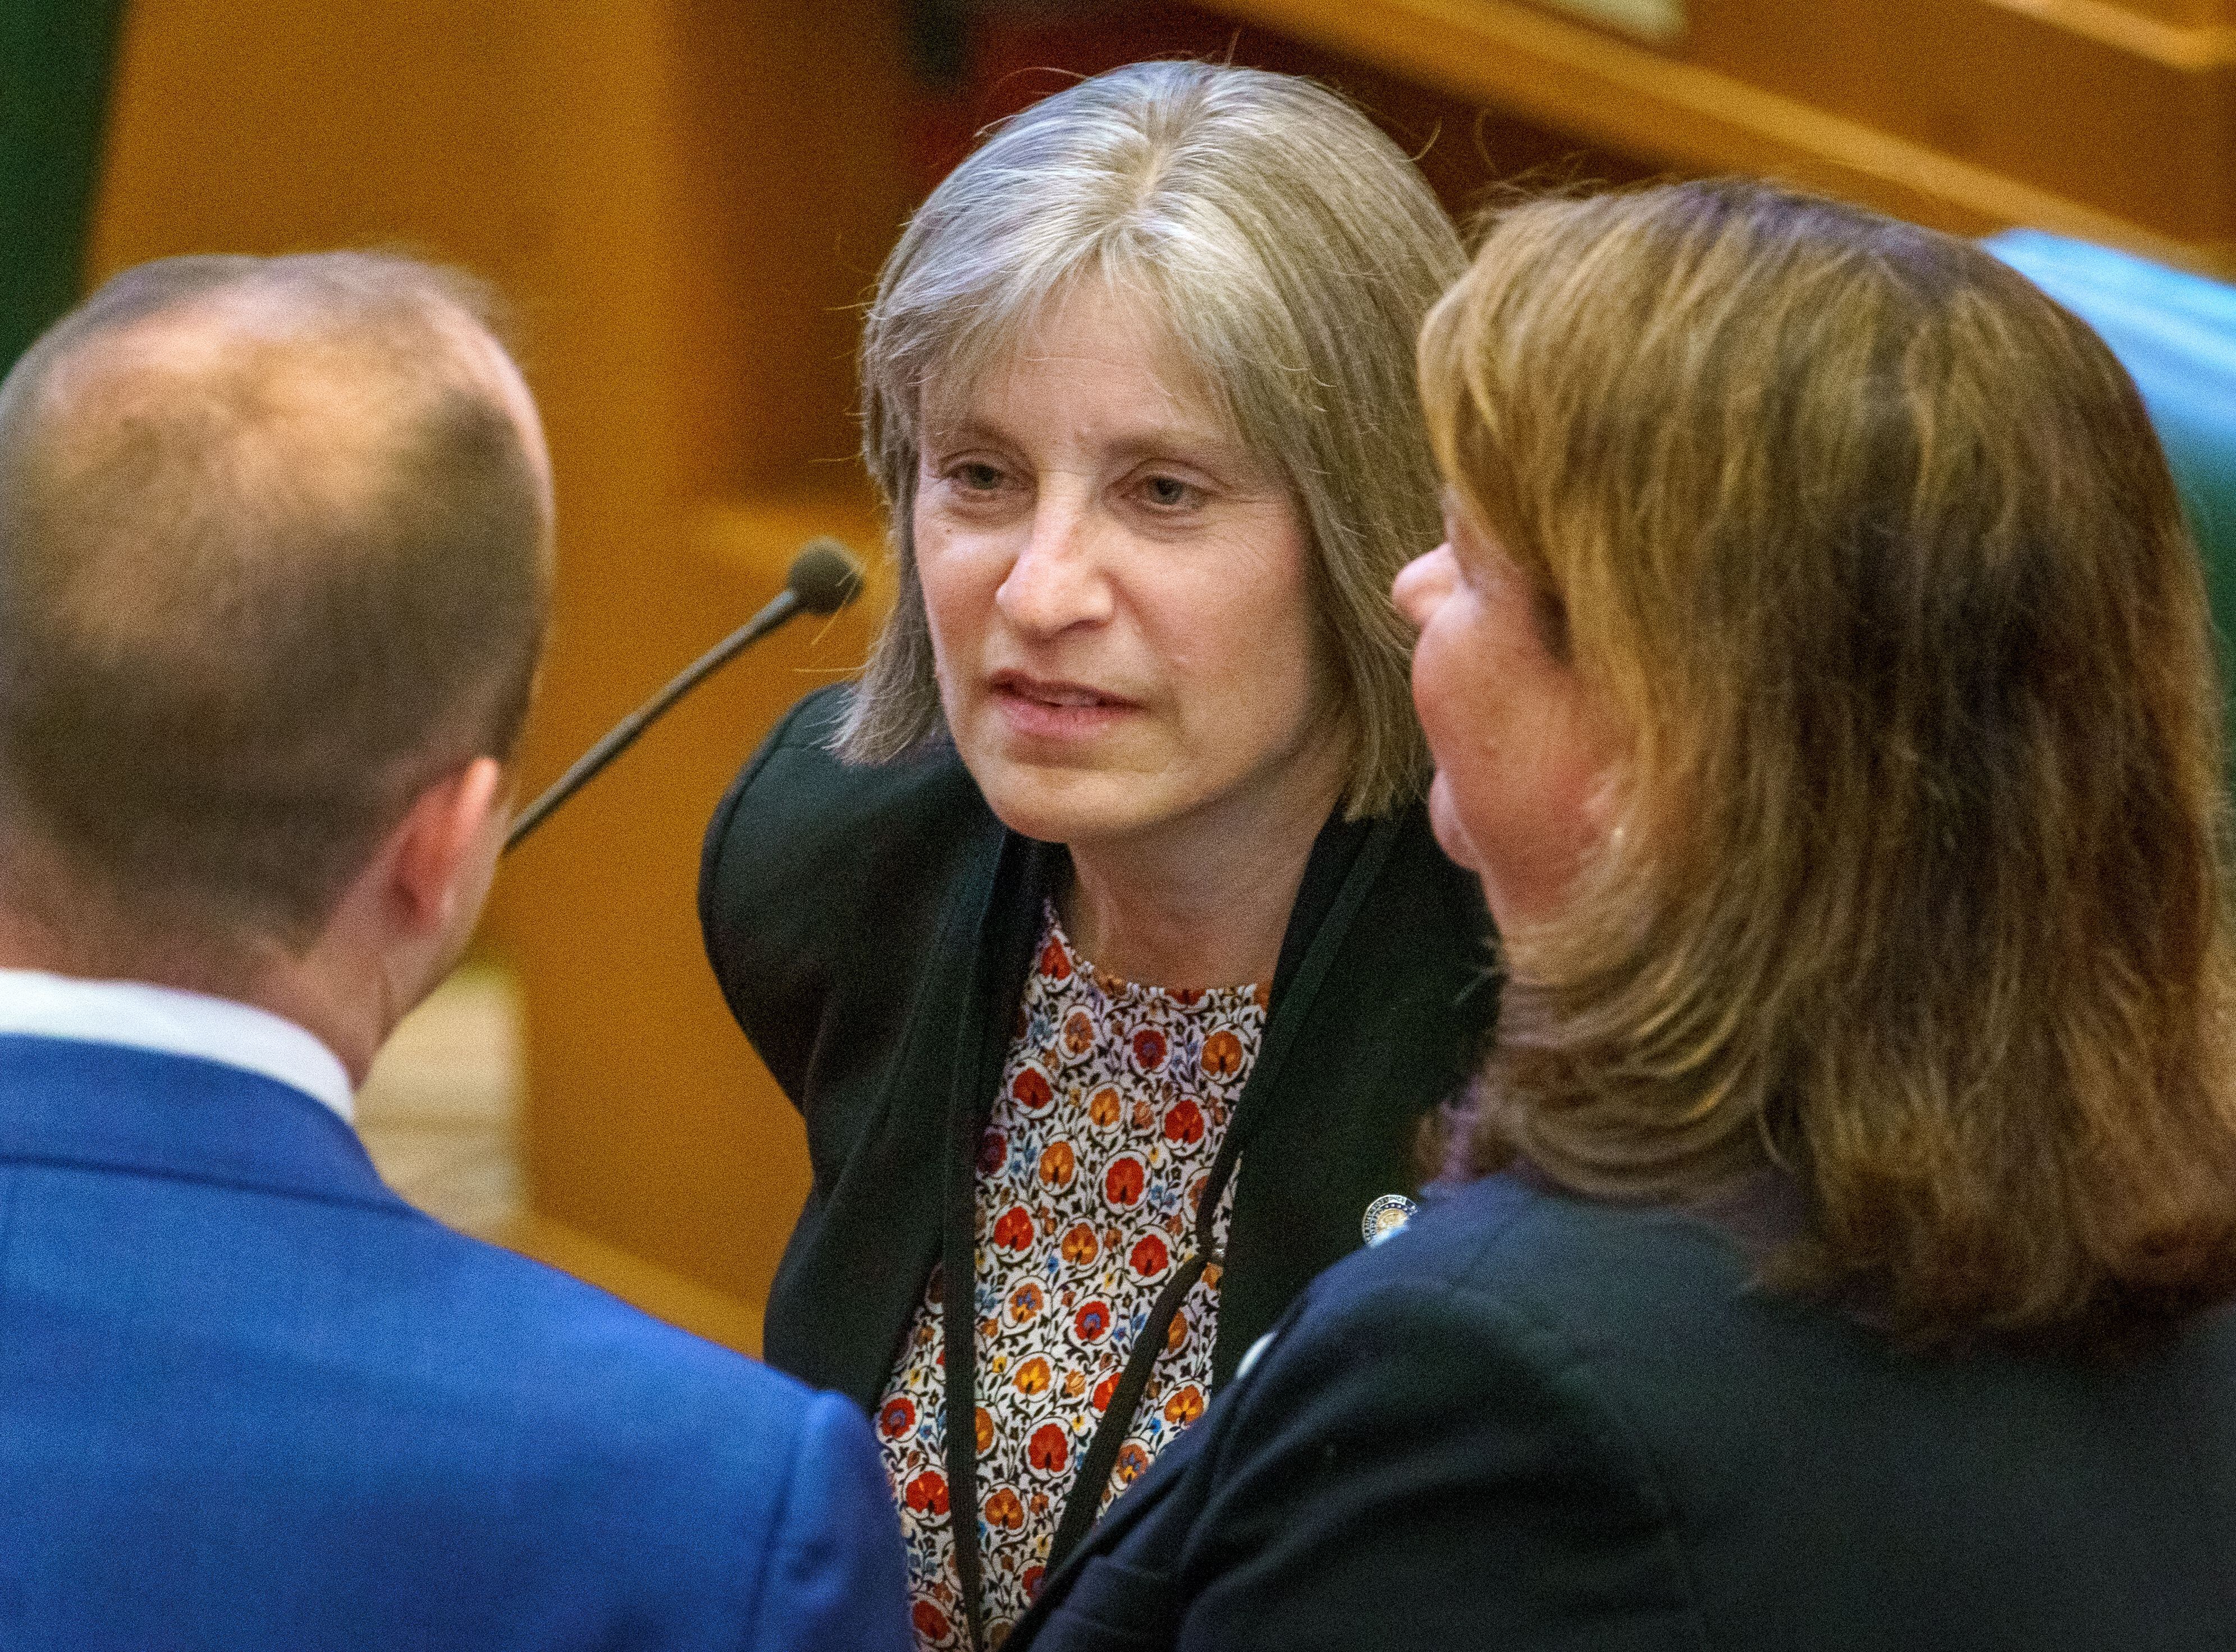 FILE: Oregon state Rep. Lisa Reynolds, D-Northeast Washington County, confers with colleagues on Feb. 5, 2024, during the opening of the legislative short session at the Oregon state Capitol in Salem, Ore. Reynolds is a pediatrician and the chair of the House Committee on Early Childhood and Human Services.